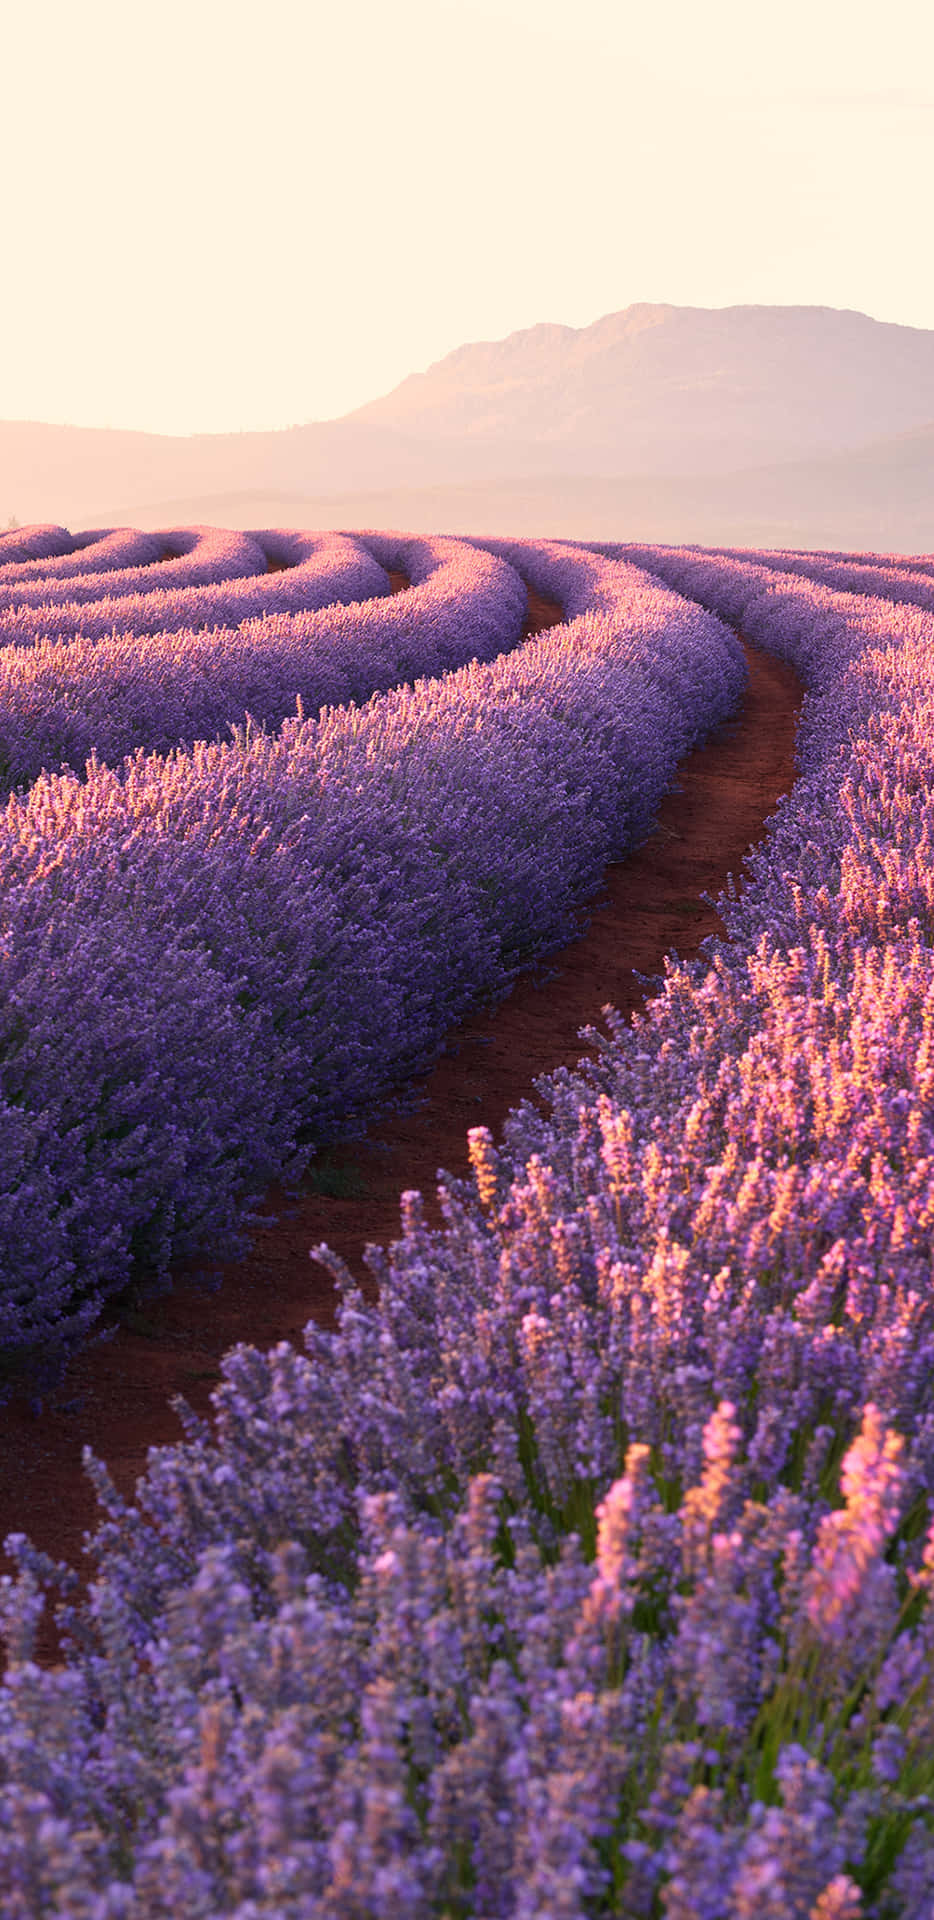 Lavender Field Curved Flower Rows Wallpaper